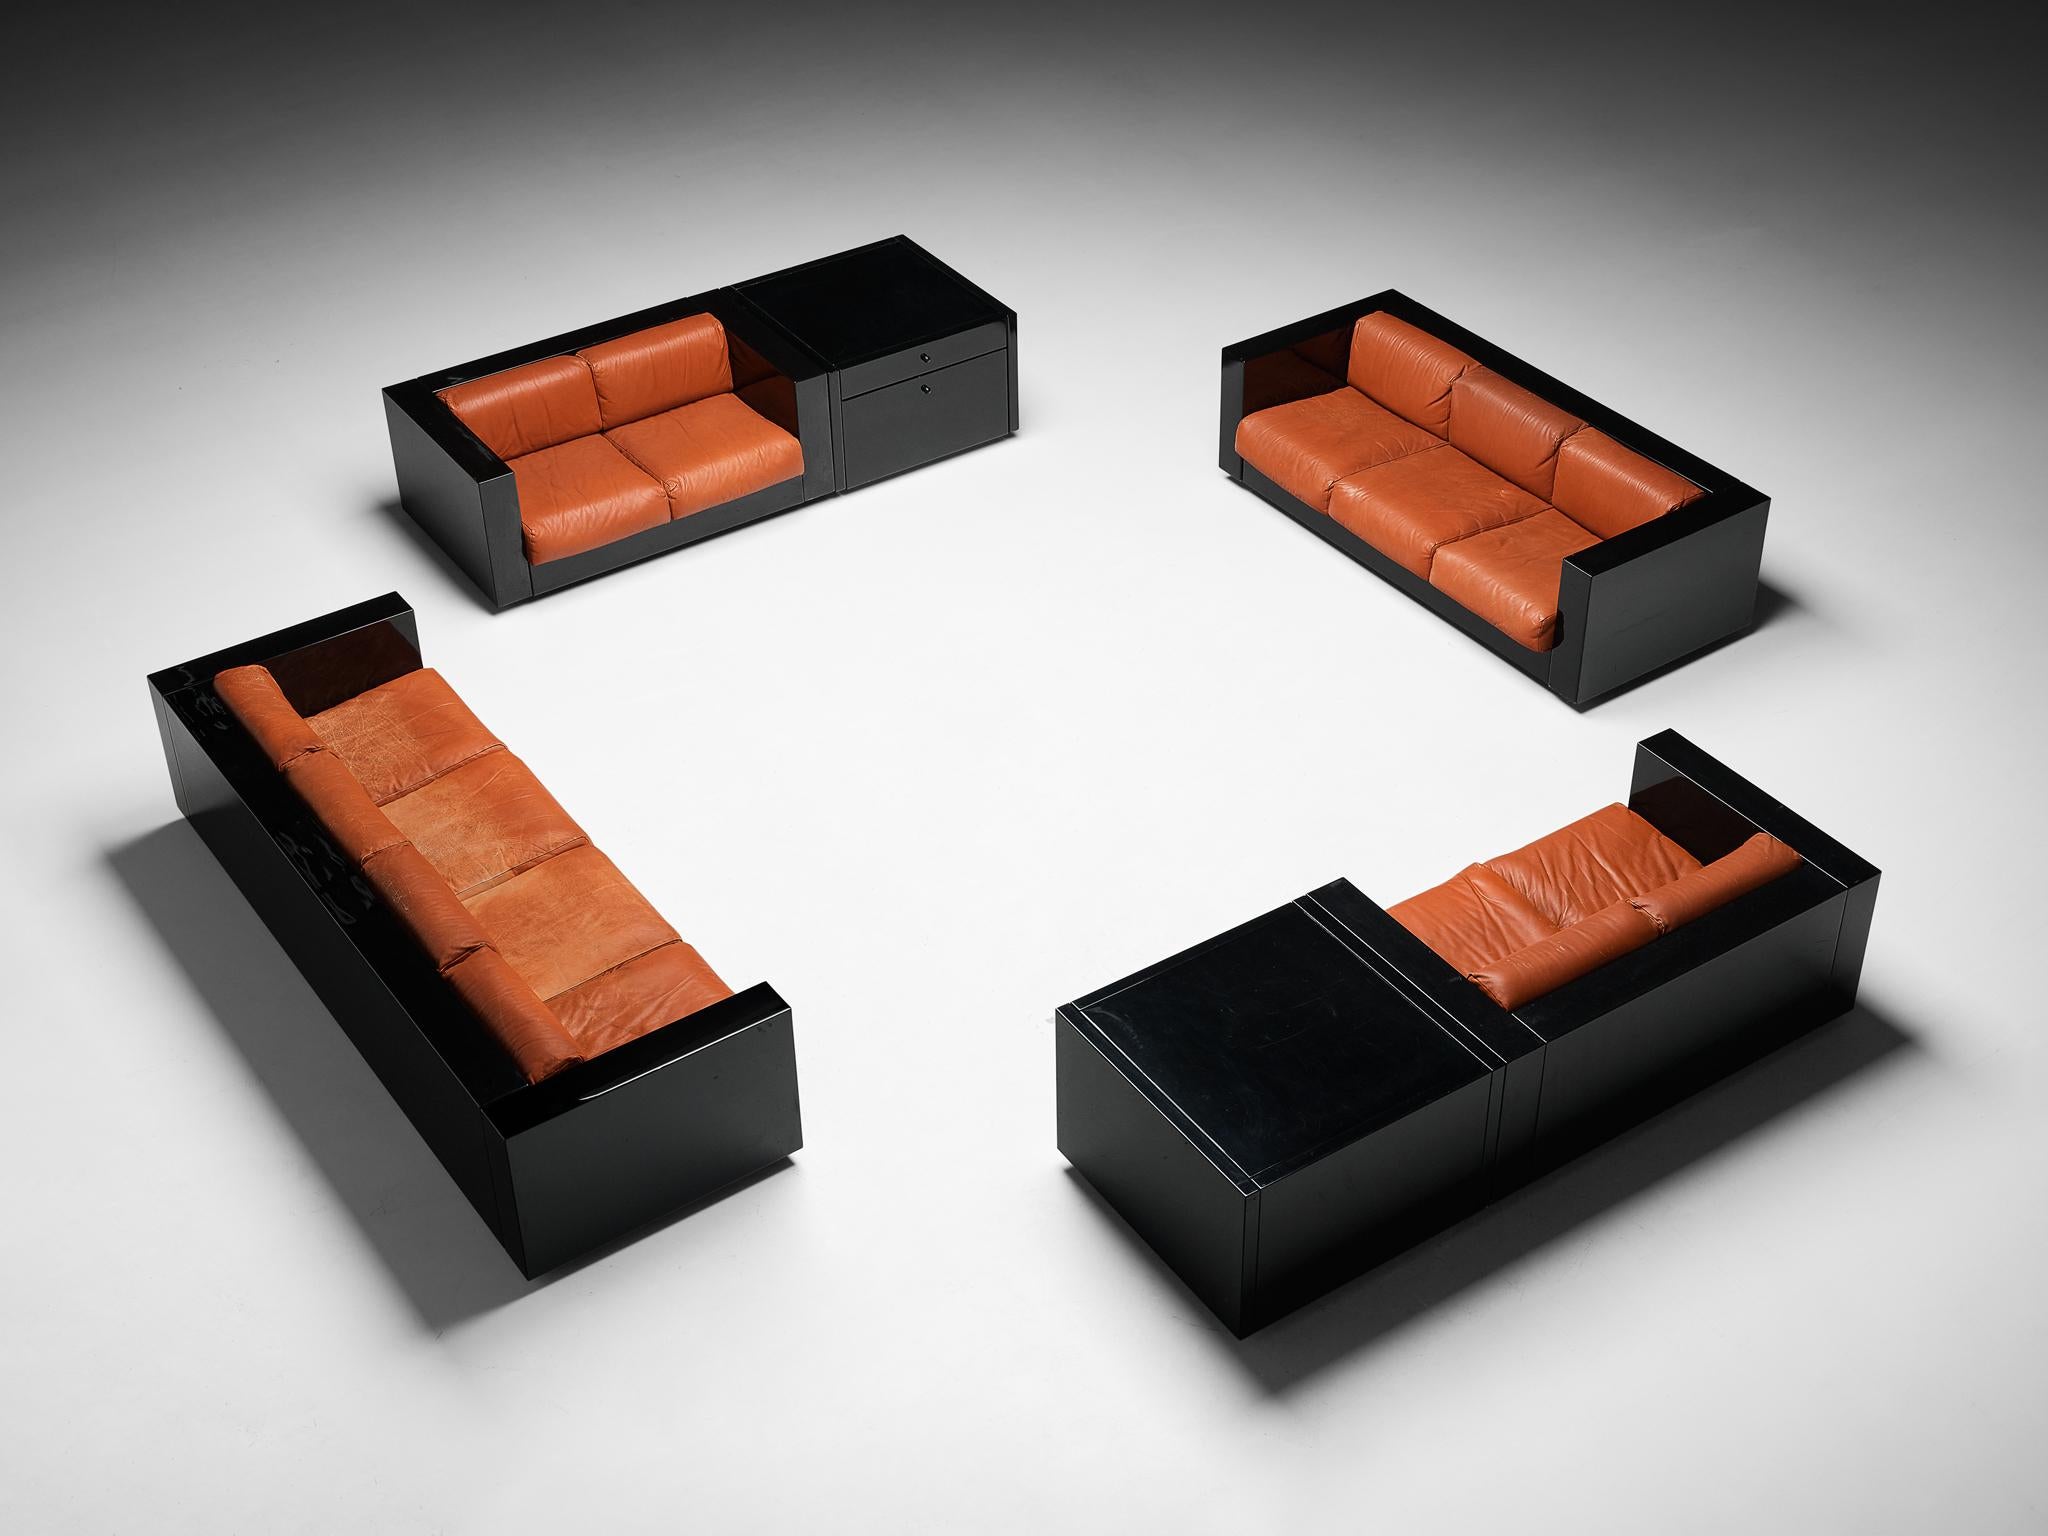 Massimo and Lella Vignelli for Poltronova 'Saratoga' living room set, four-seat sofa, three-seat sofa, two two-seat sofas, cabinets, polyester lacquer and red leather, Italy, 1964.

Captivating large lounge set or living room interior by Italian